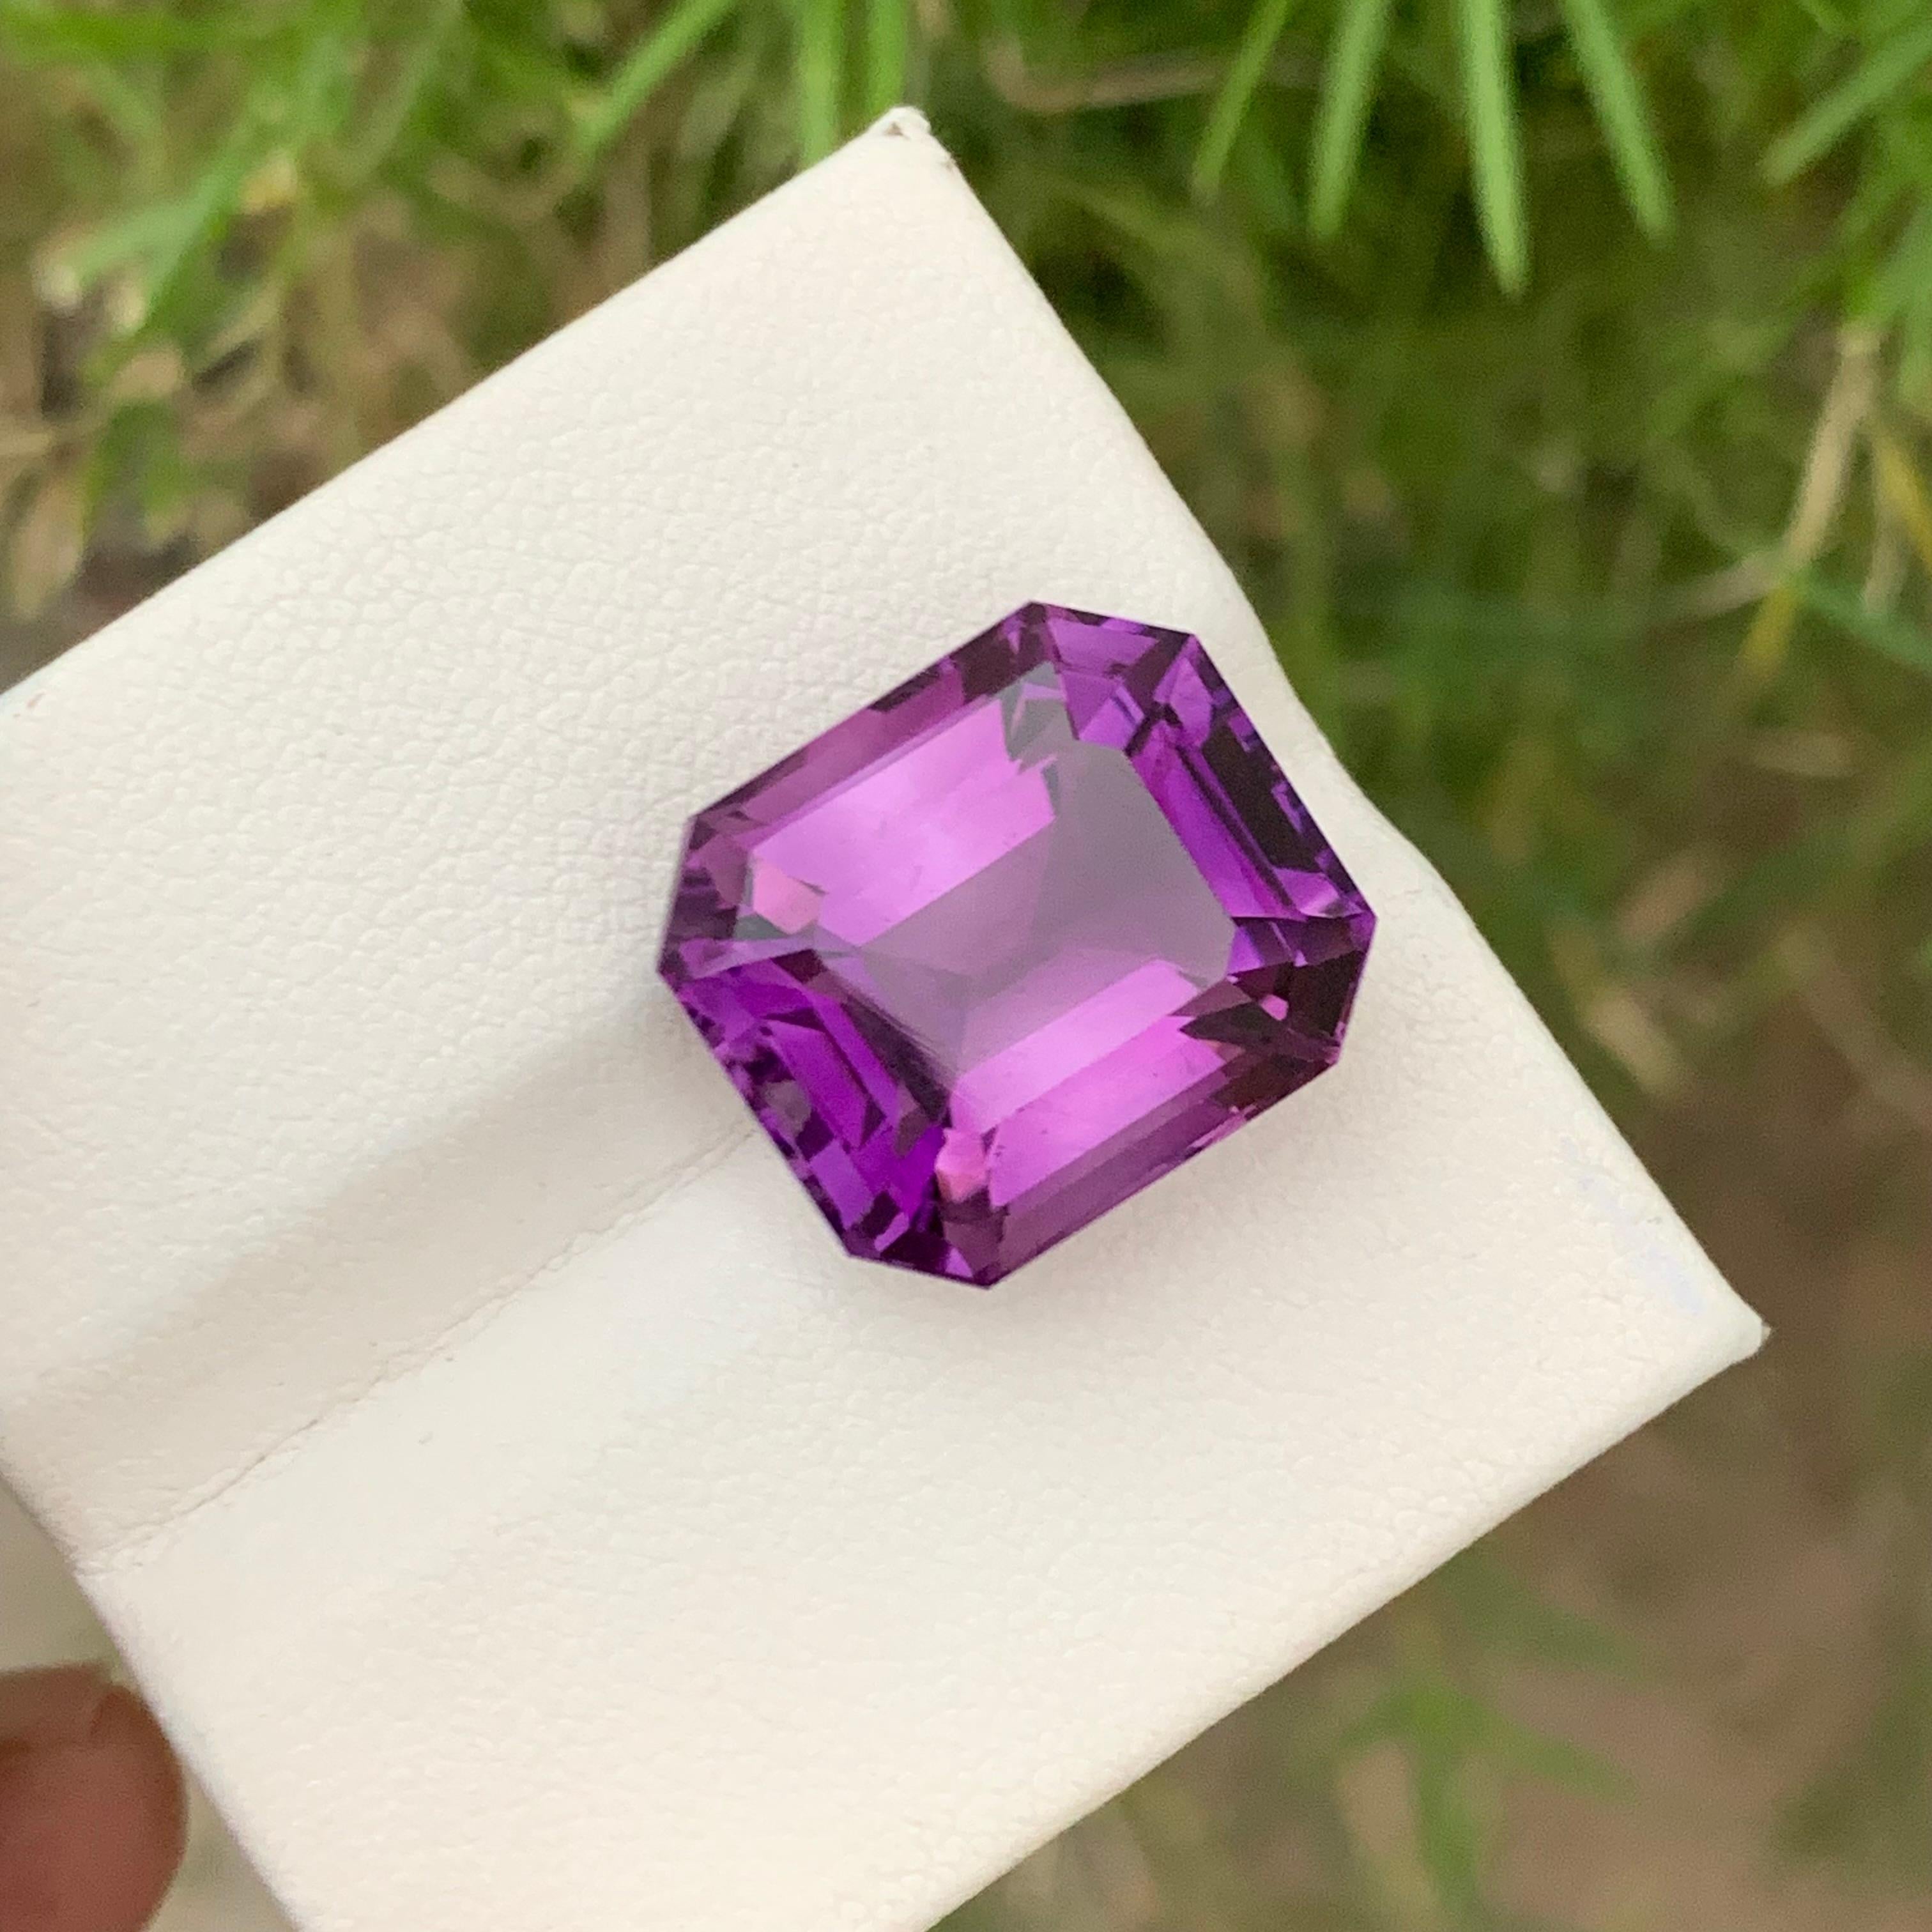 19.0 Carats Natural Loose Deep Purple Amethyst Gemstone From Brazil Mine For Sale 4